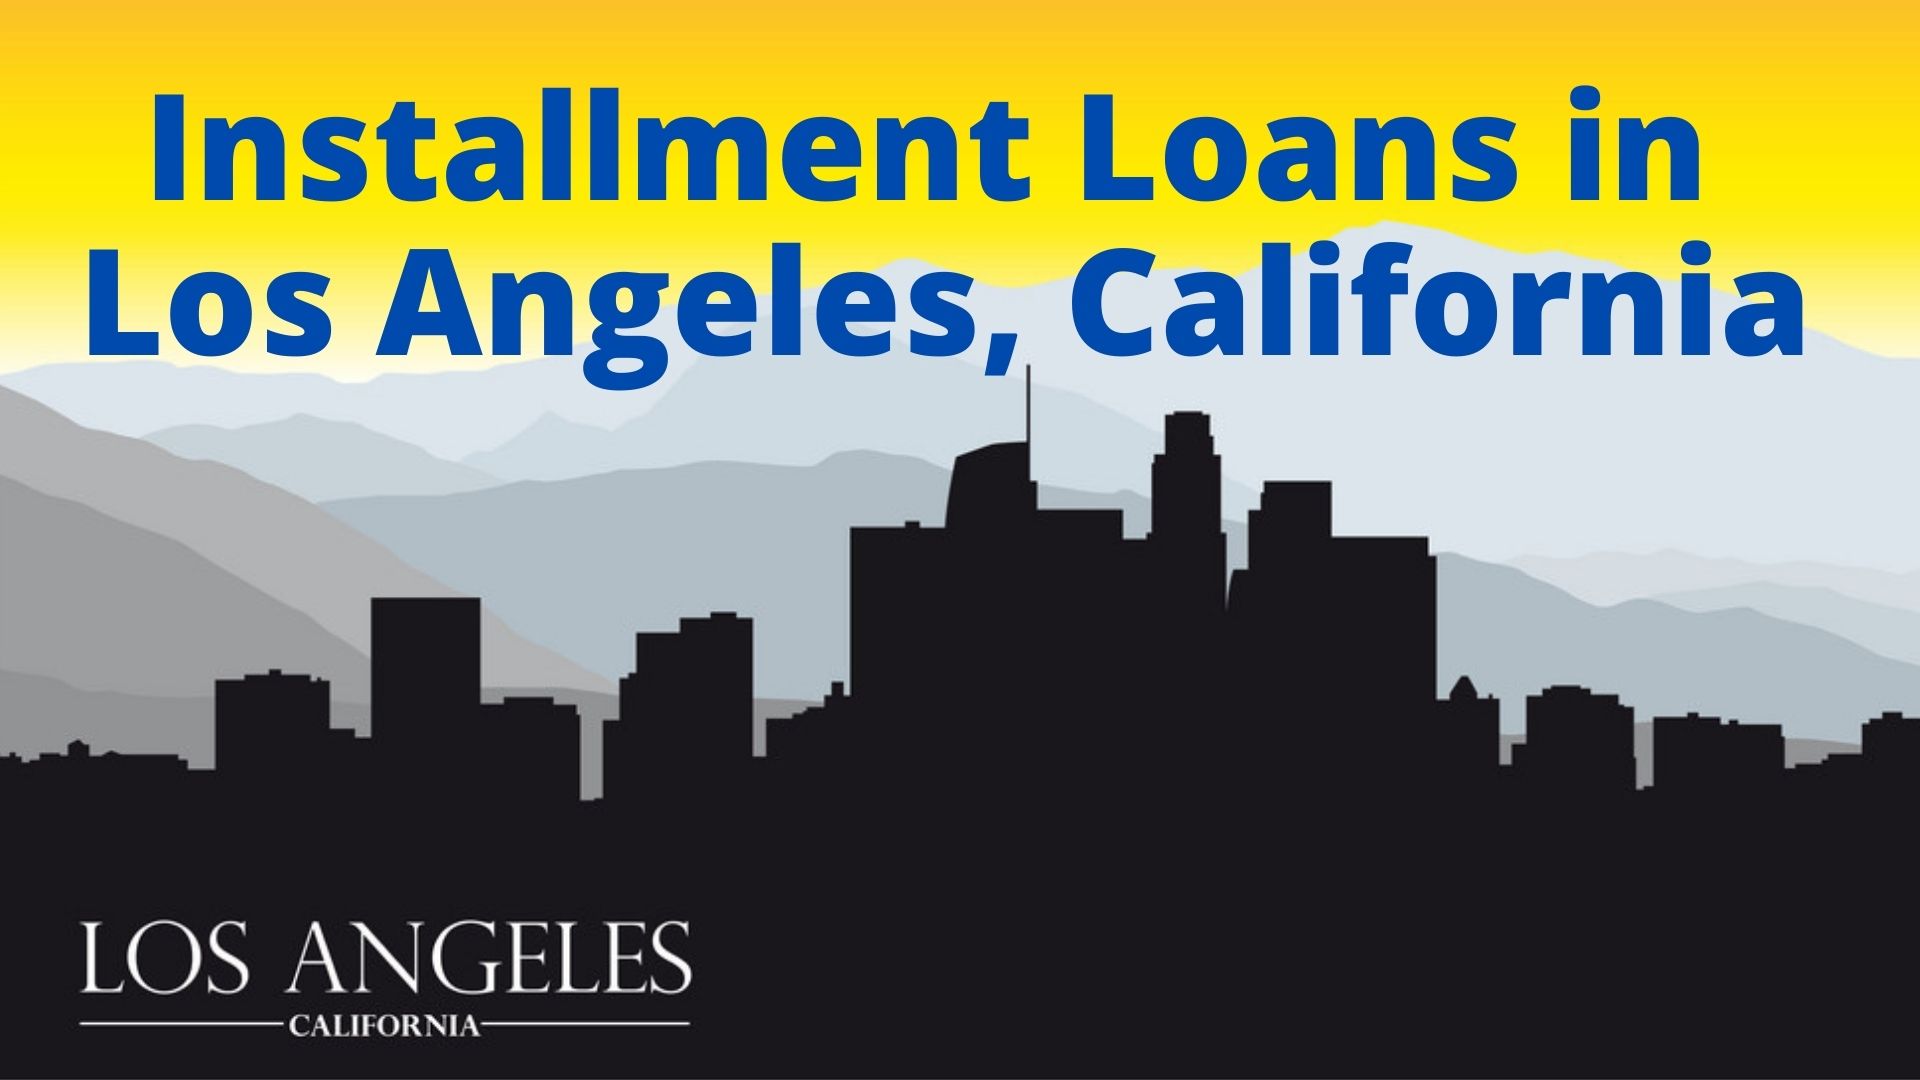 The regulations and costs for Los Angeles, CA Installment Loans